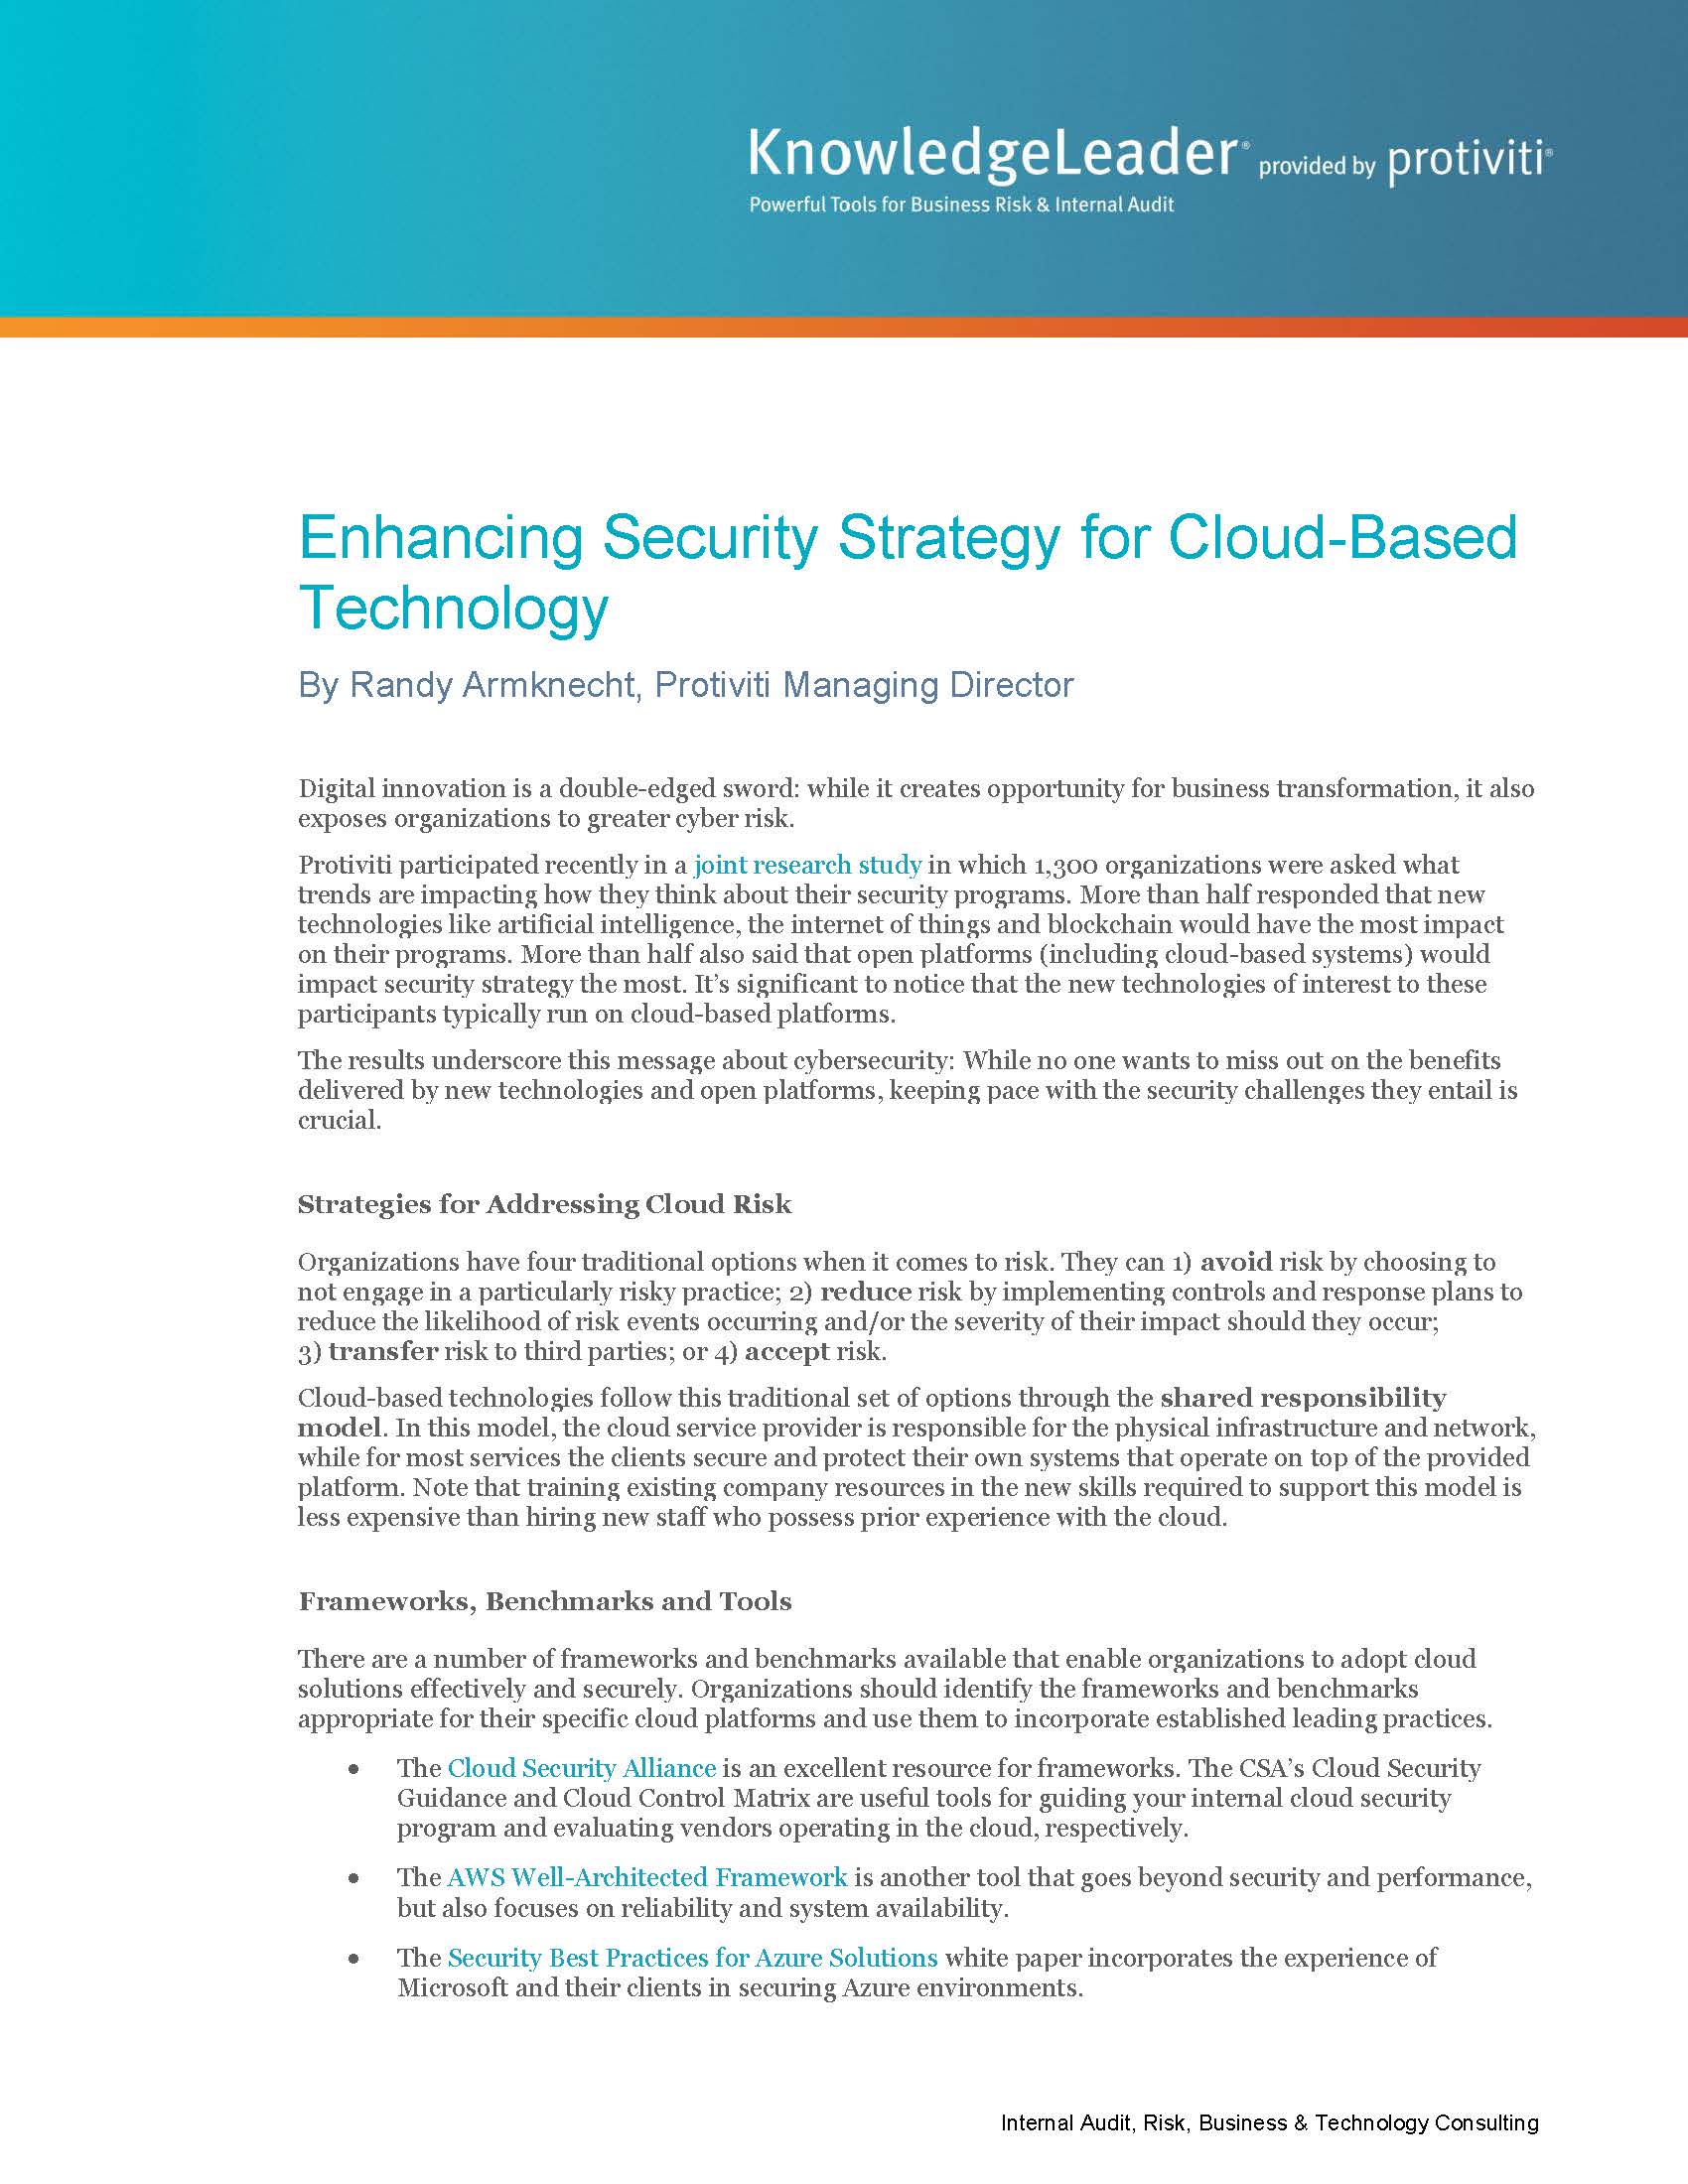 Screenshot of the first page of Enhancing Security Strategy for Cloud-Based Technology